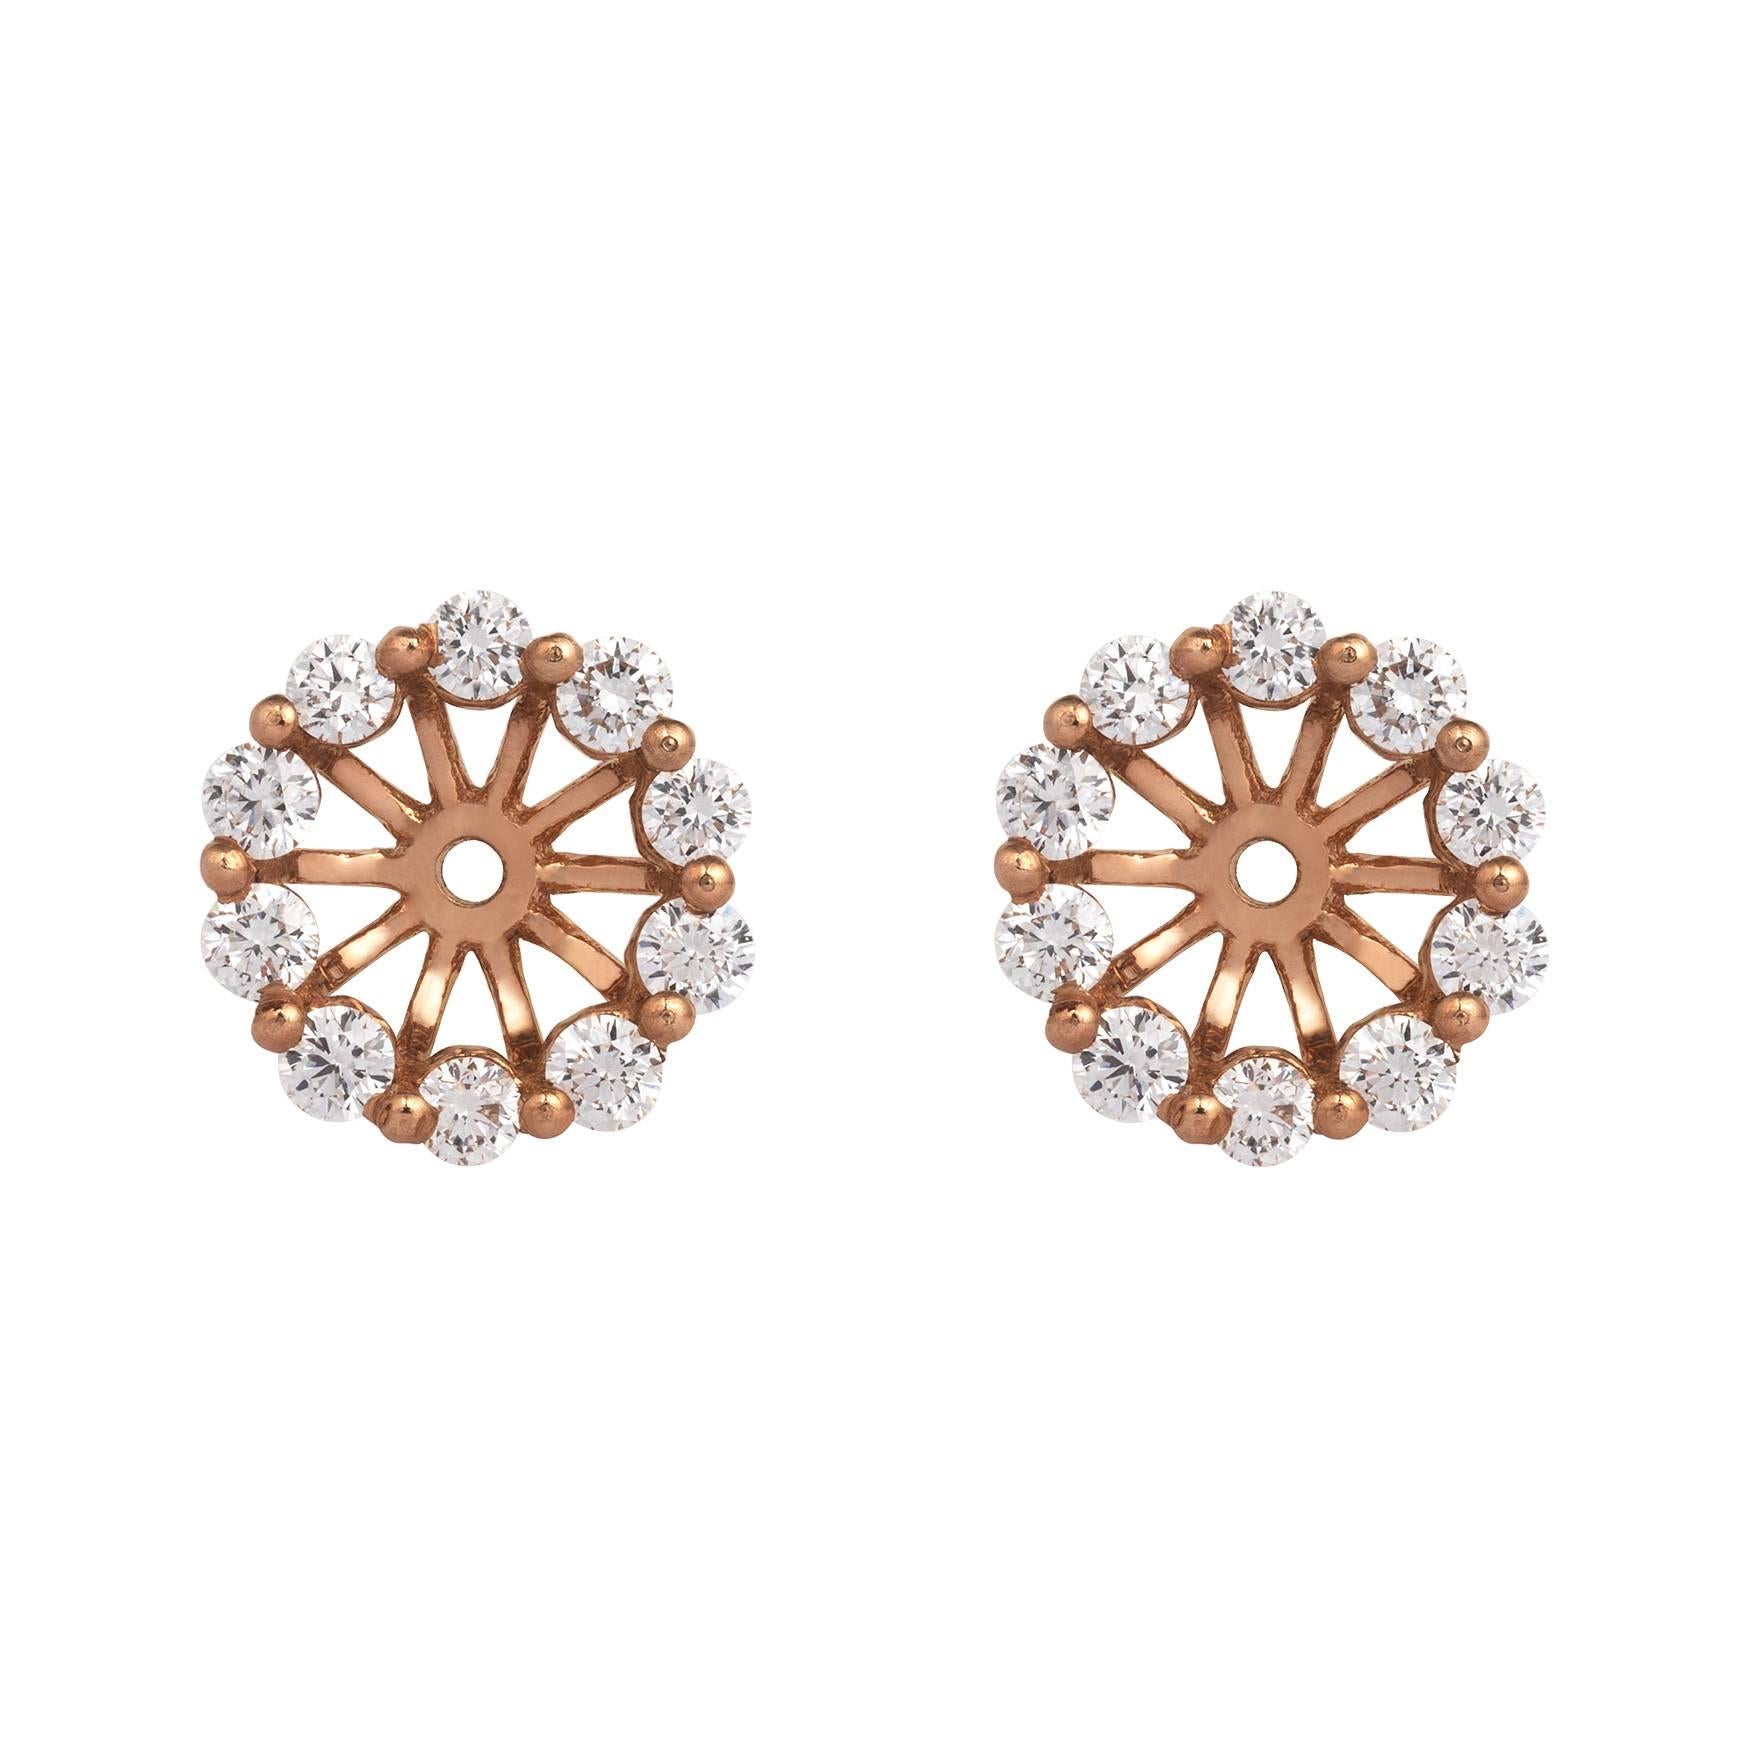 These versatile diamond earring studs can be worn as a more impressive 3-tier diamond stud, or the earring jacket can be removed to transform it into a 2-tier version, perfectly understated and beautifully discreet. These earrings are very popular